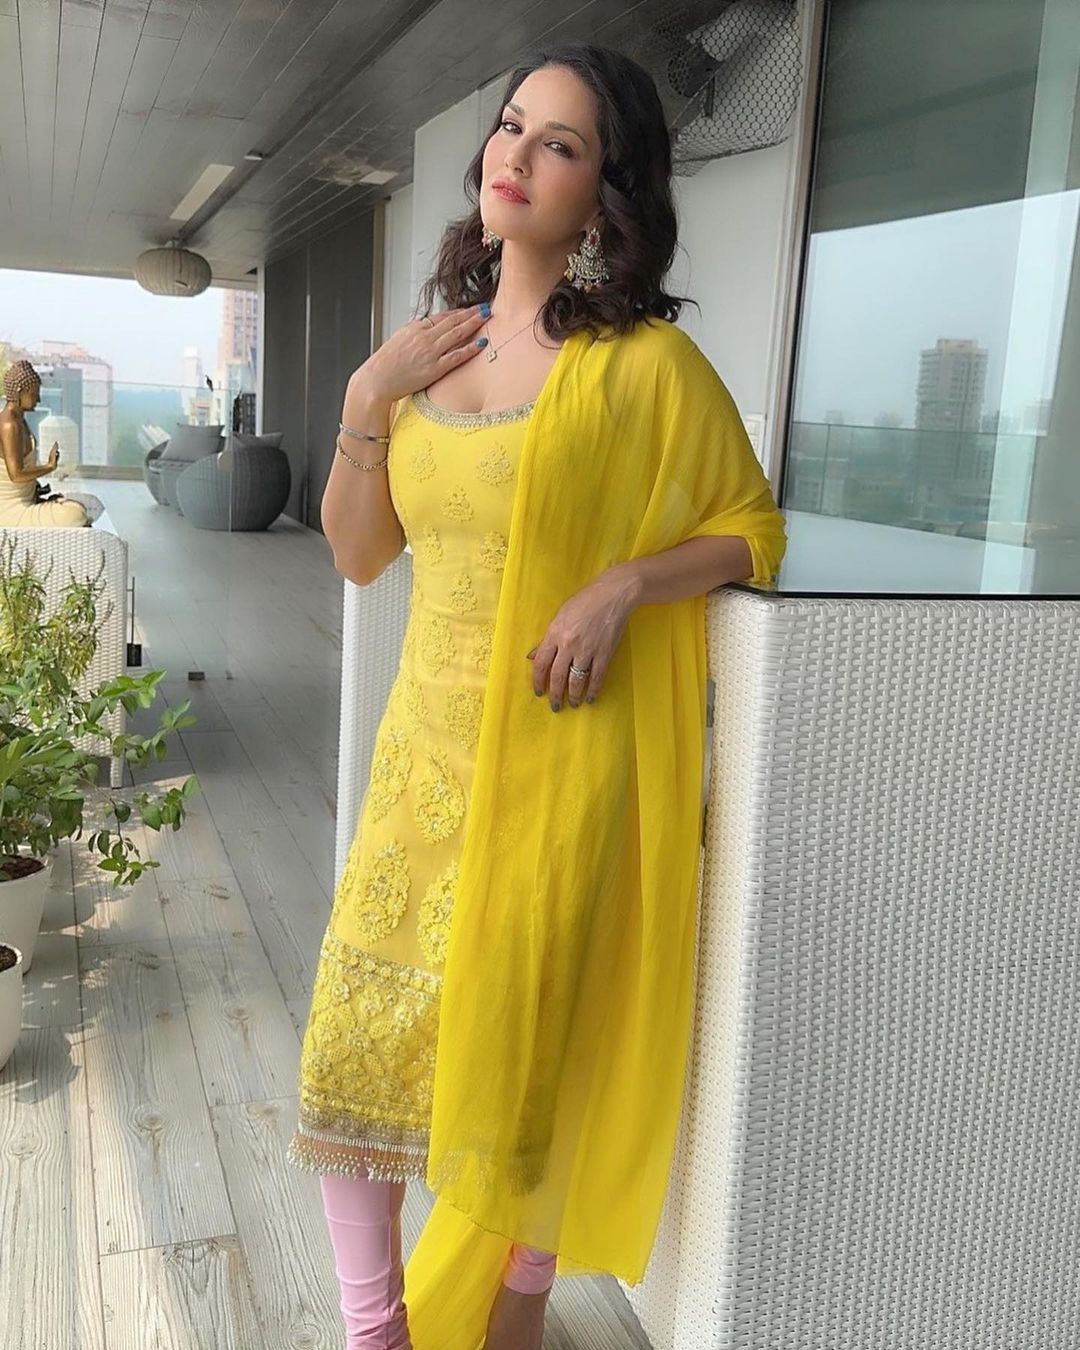 The MMS Ragini 2 actress looks pretty in yellow for Holi celebrations. (Image: Instagram)